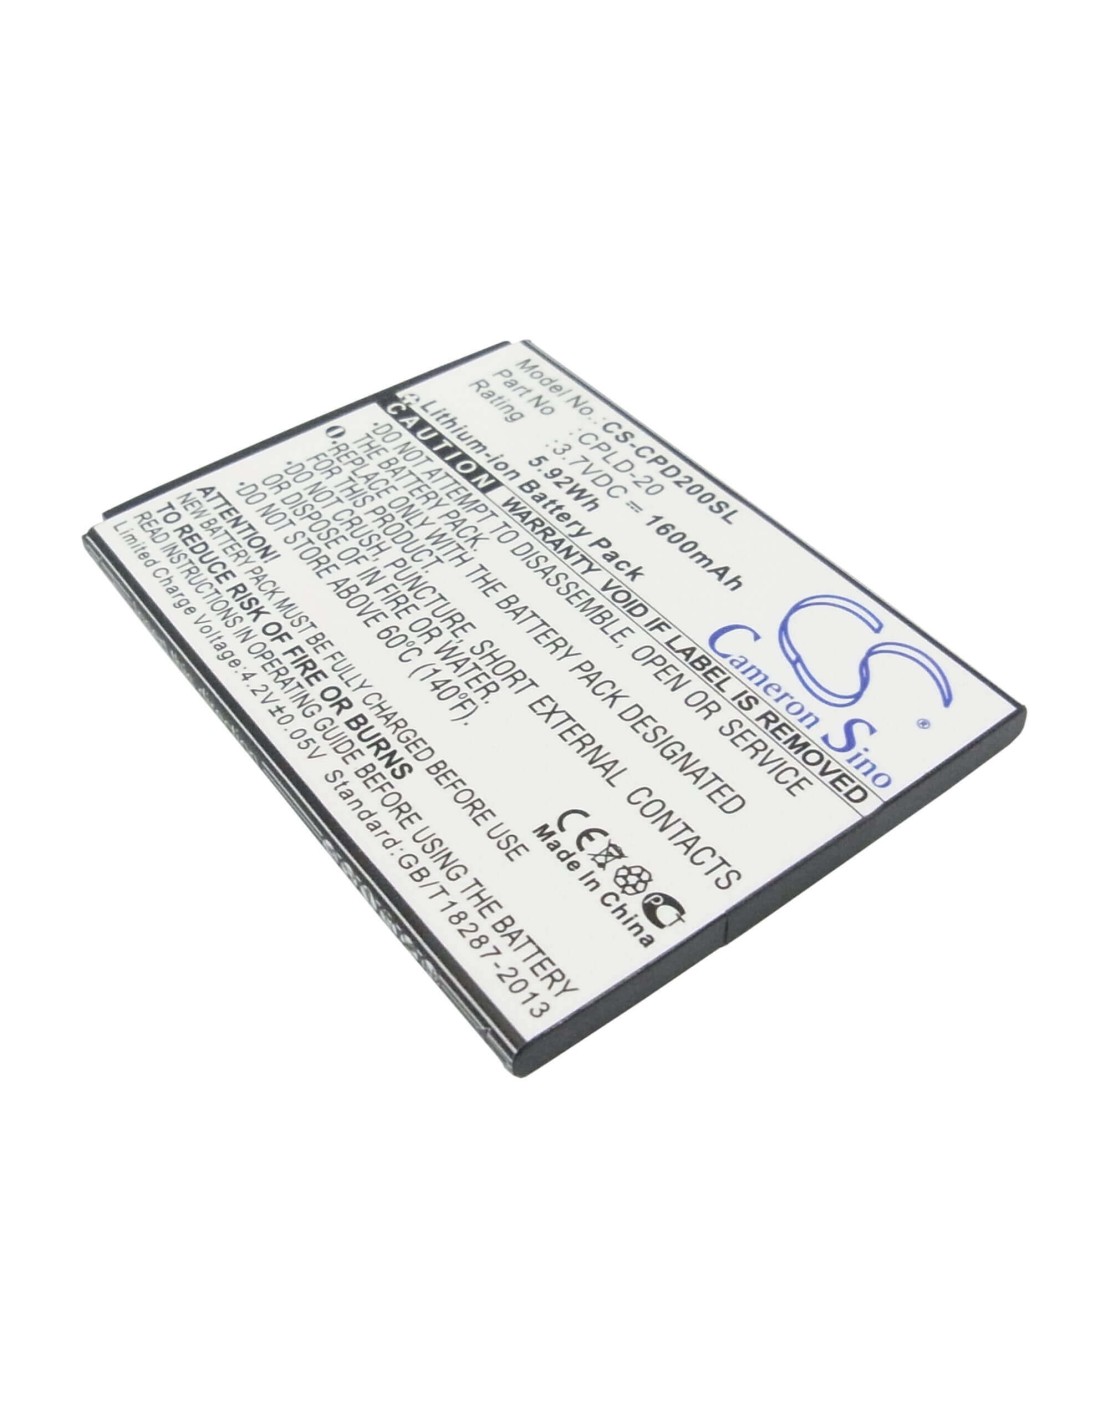 Battery for Coolpad 8730, 8736, 8920 3.7V, 1600mAh - 5.92Wh